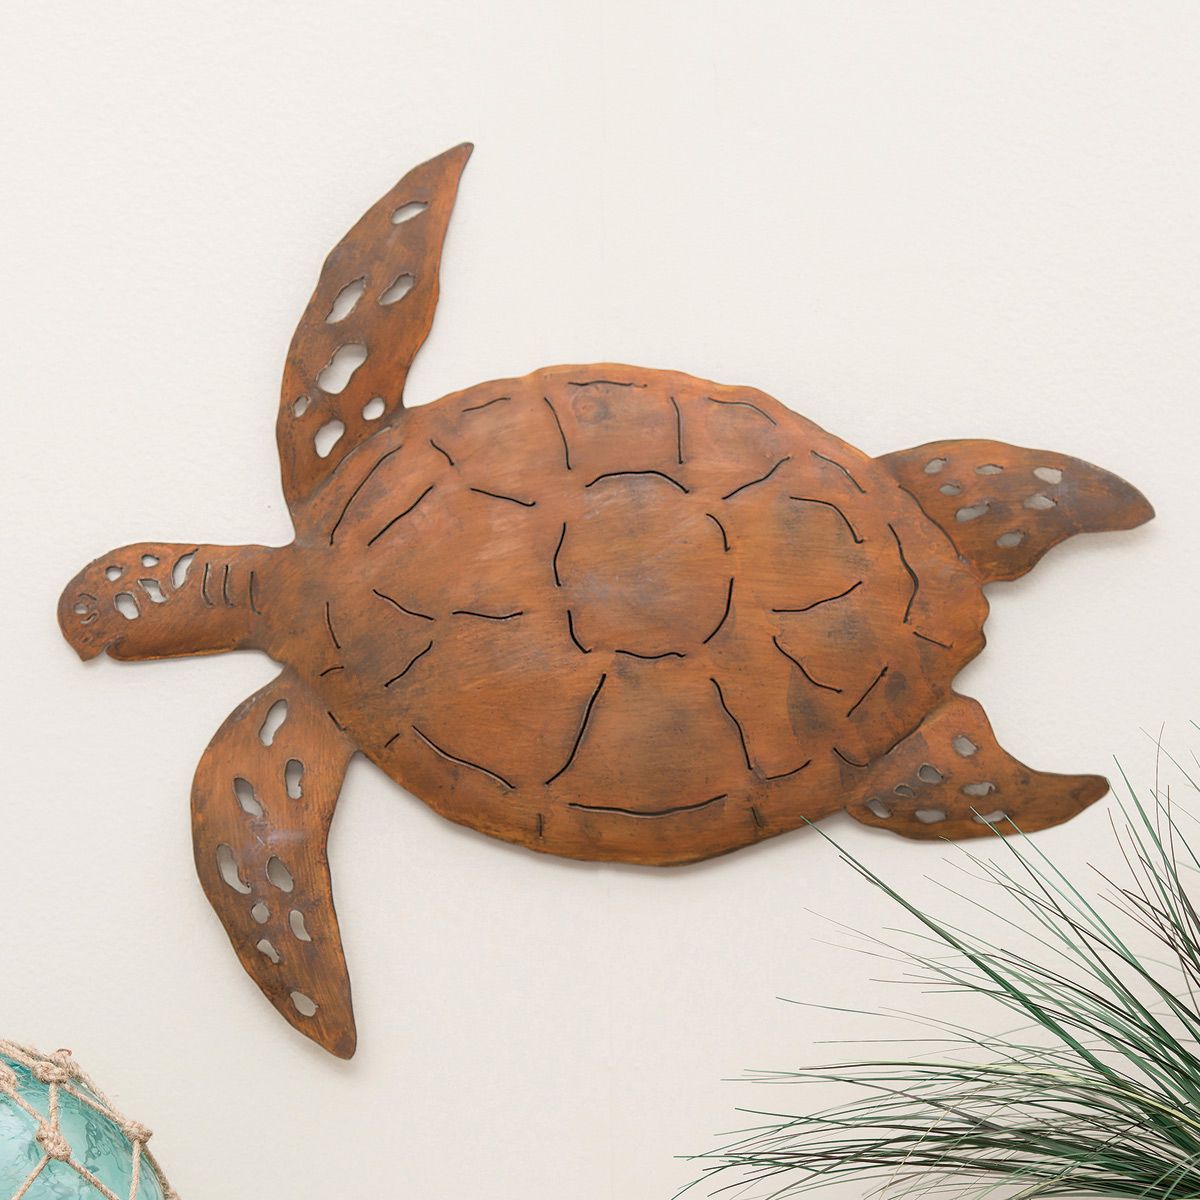 Beach Wall Art: Large Oxidized Metal Sea Turtle Wall Art For Best And Newest Ocean Metal Wall Art (View 9 of 20)